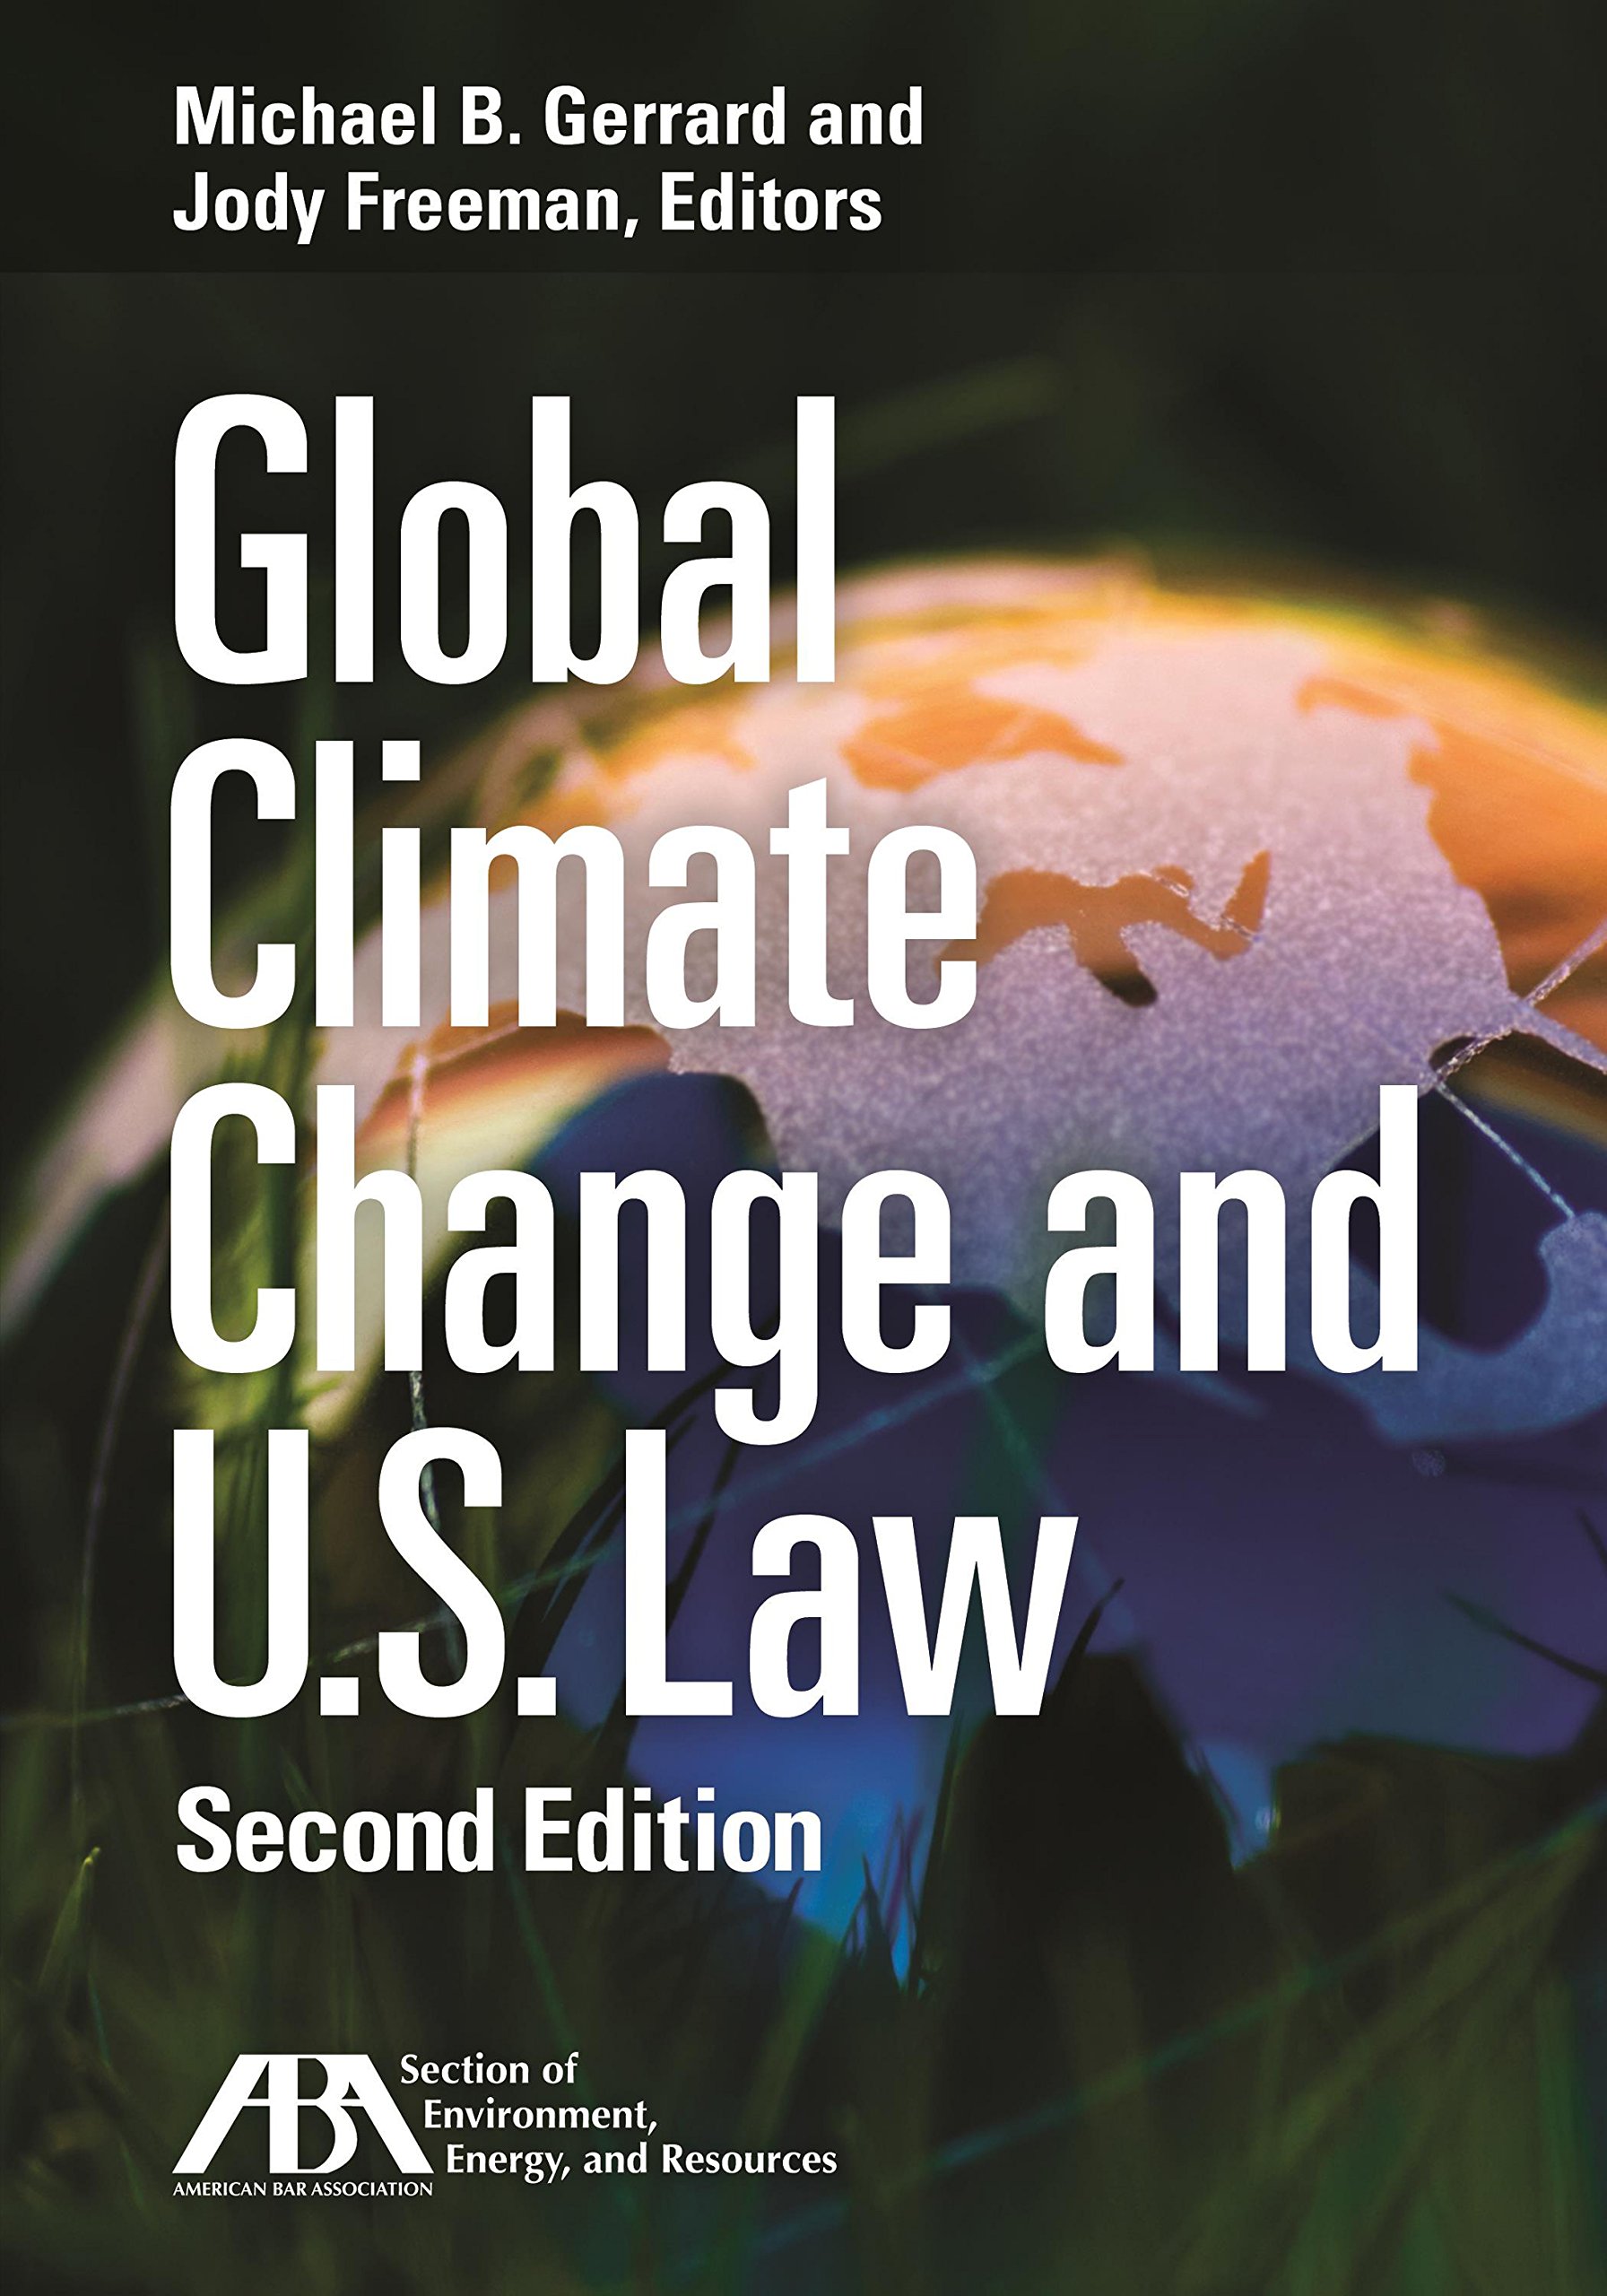 Climate Law Blog Blog Archive 50 State Survey Of Climate Laws